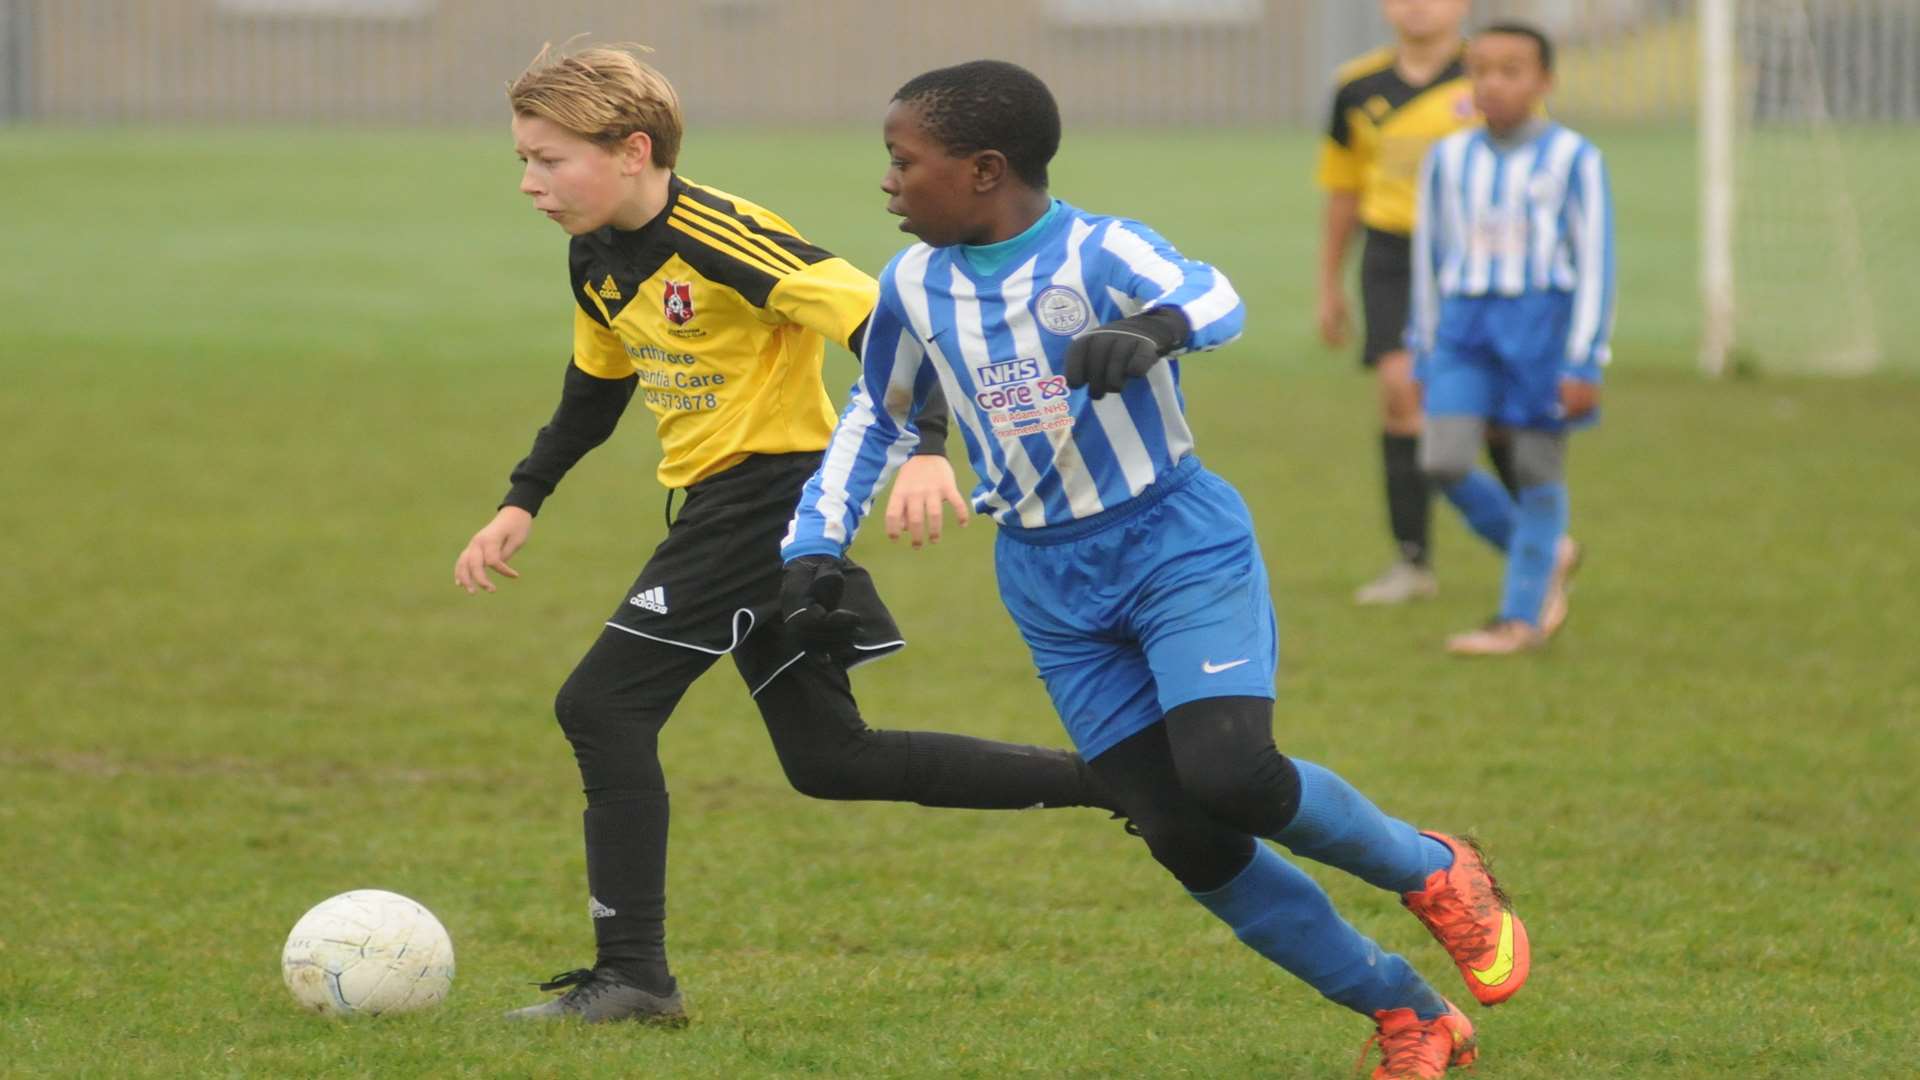 Chatham Riverside Rangers and Thamesview under-12s do battle in Division 3 Picture: Steve Crispe